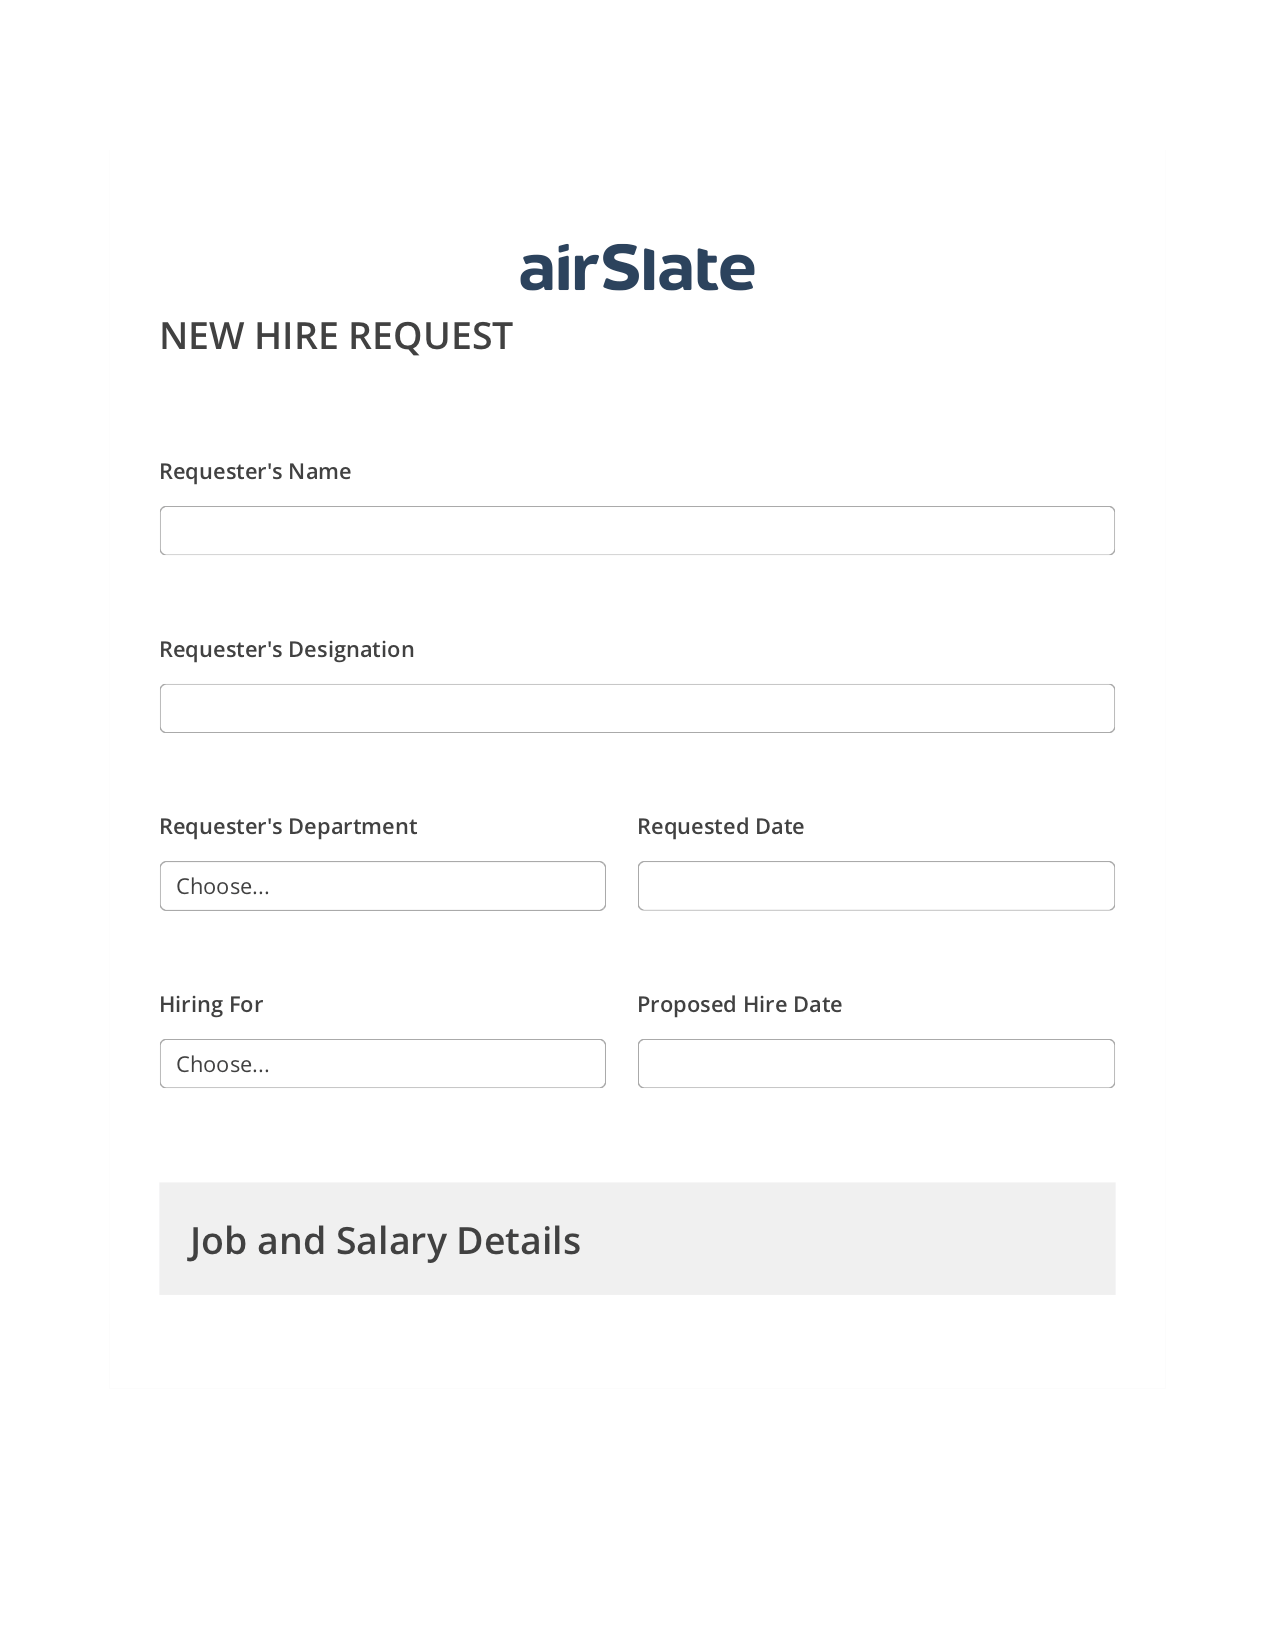 Hiring Request Workflow Pre-fill Dropdowns from Smartsheet Bot, System Bot - Create a Slate in another Flow, Export to Smartsheet